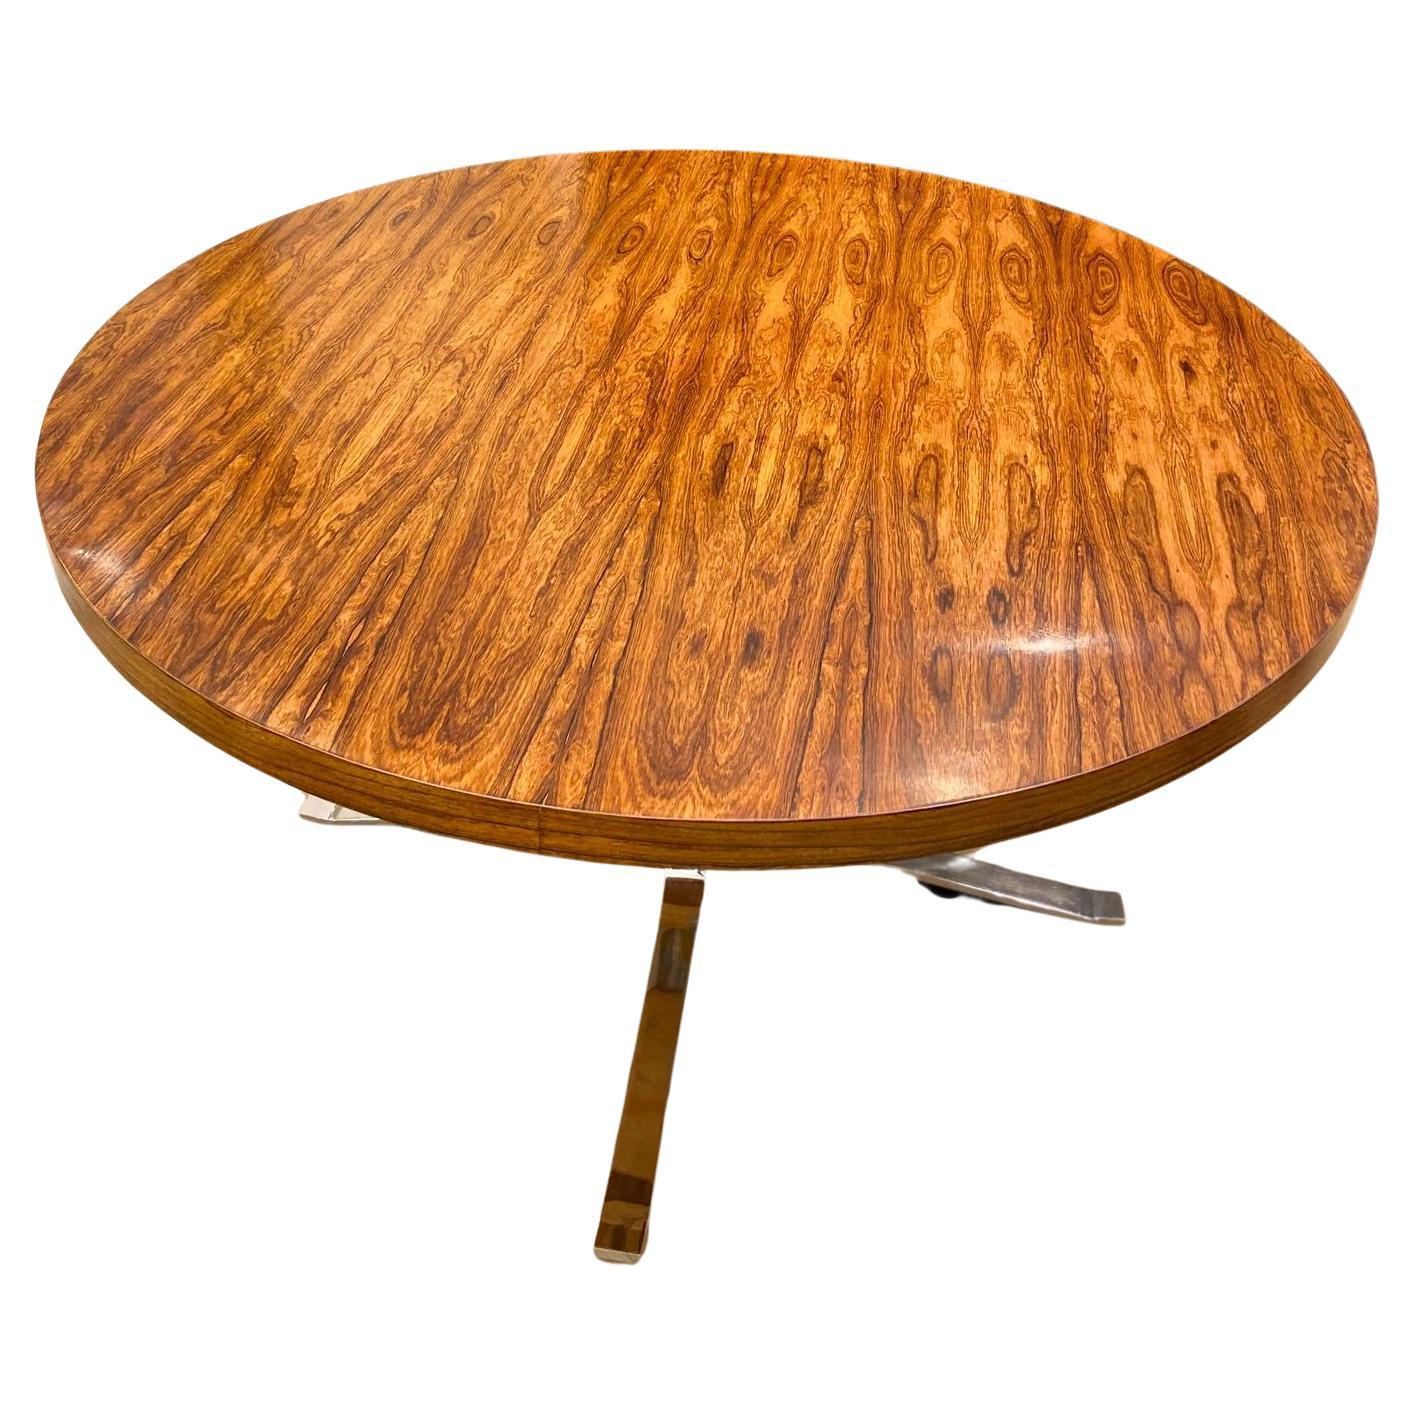 Vintage 1960's Merrow Associates Round Dining Table For Sale